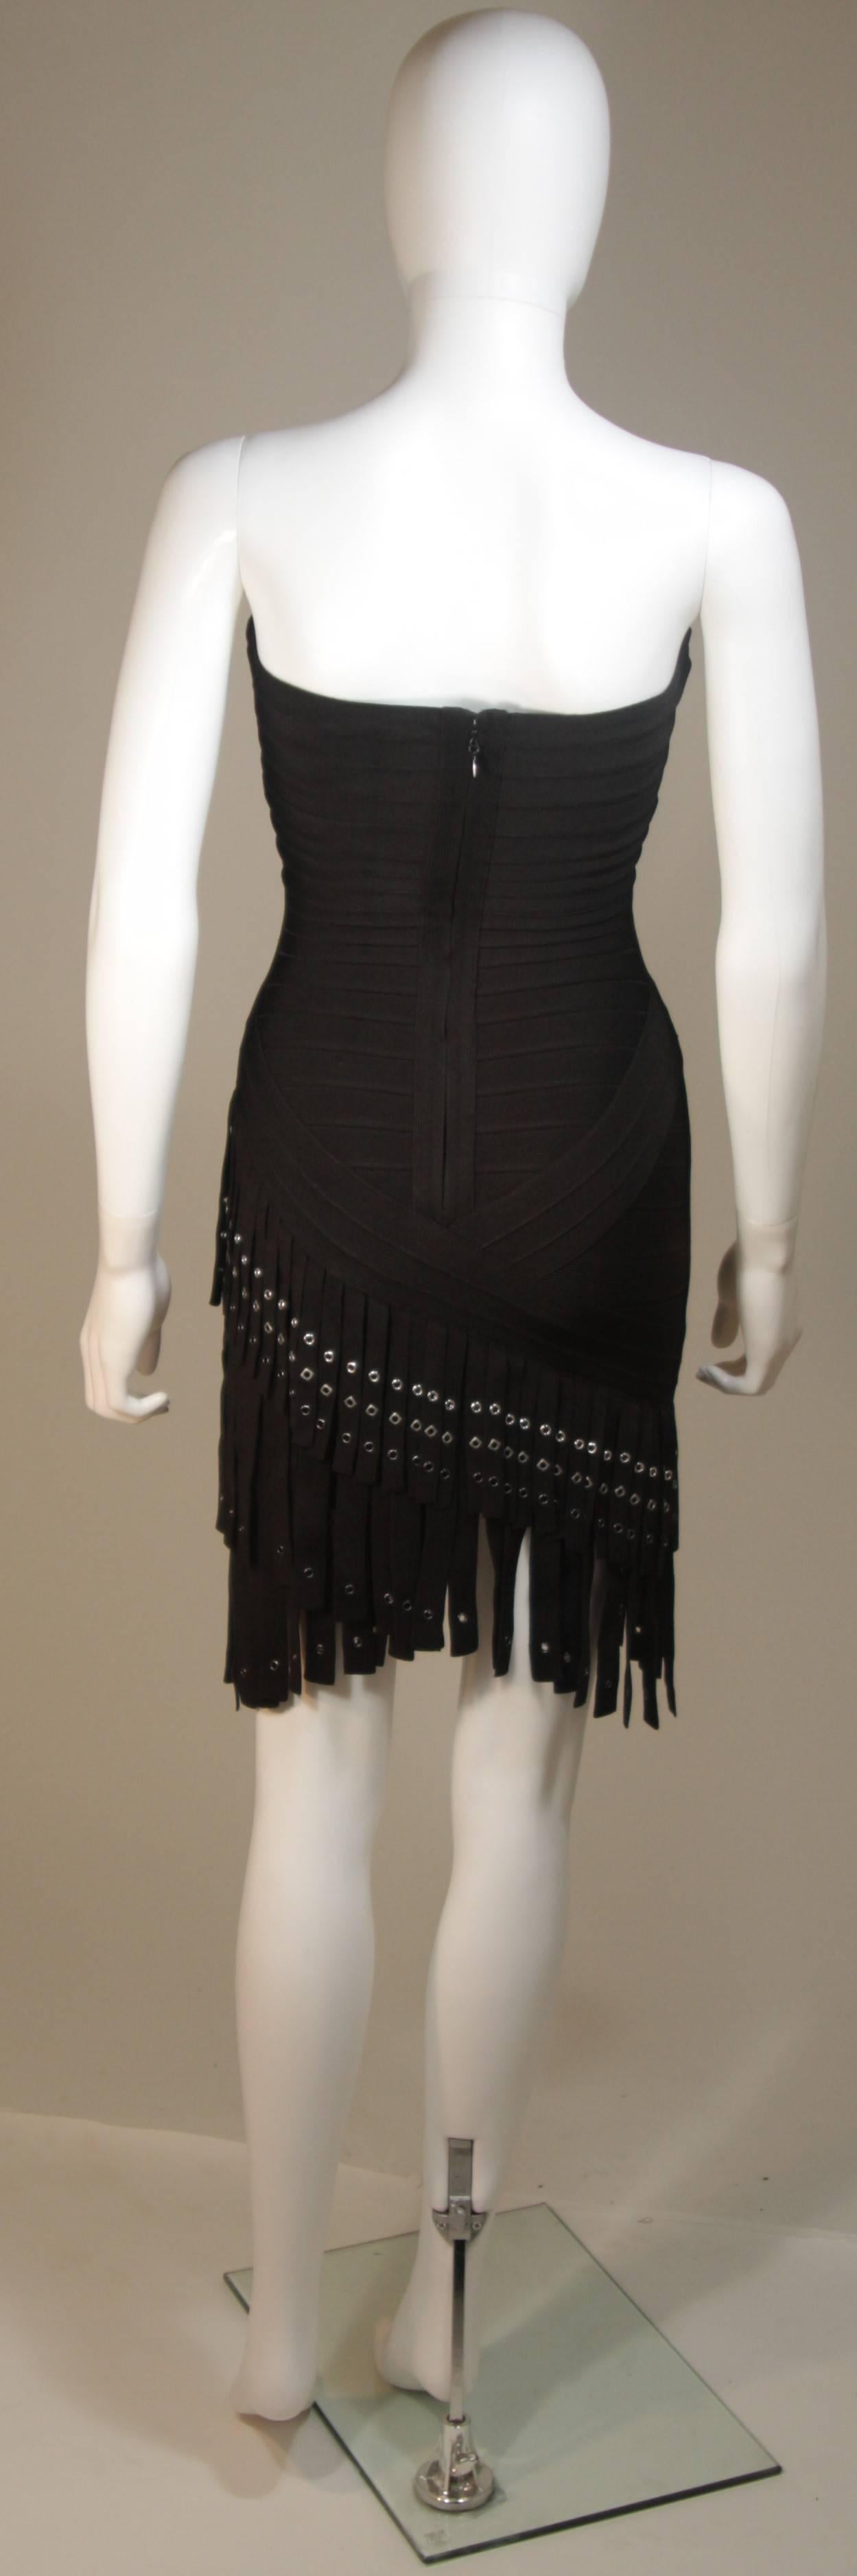 HERVE LEGER Black Bodicon Cocktail Dress with Gromets and Fringe Size XS 3